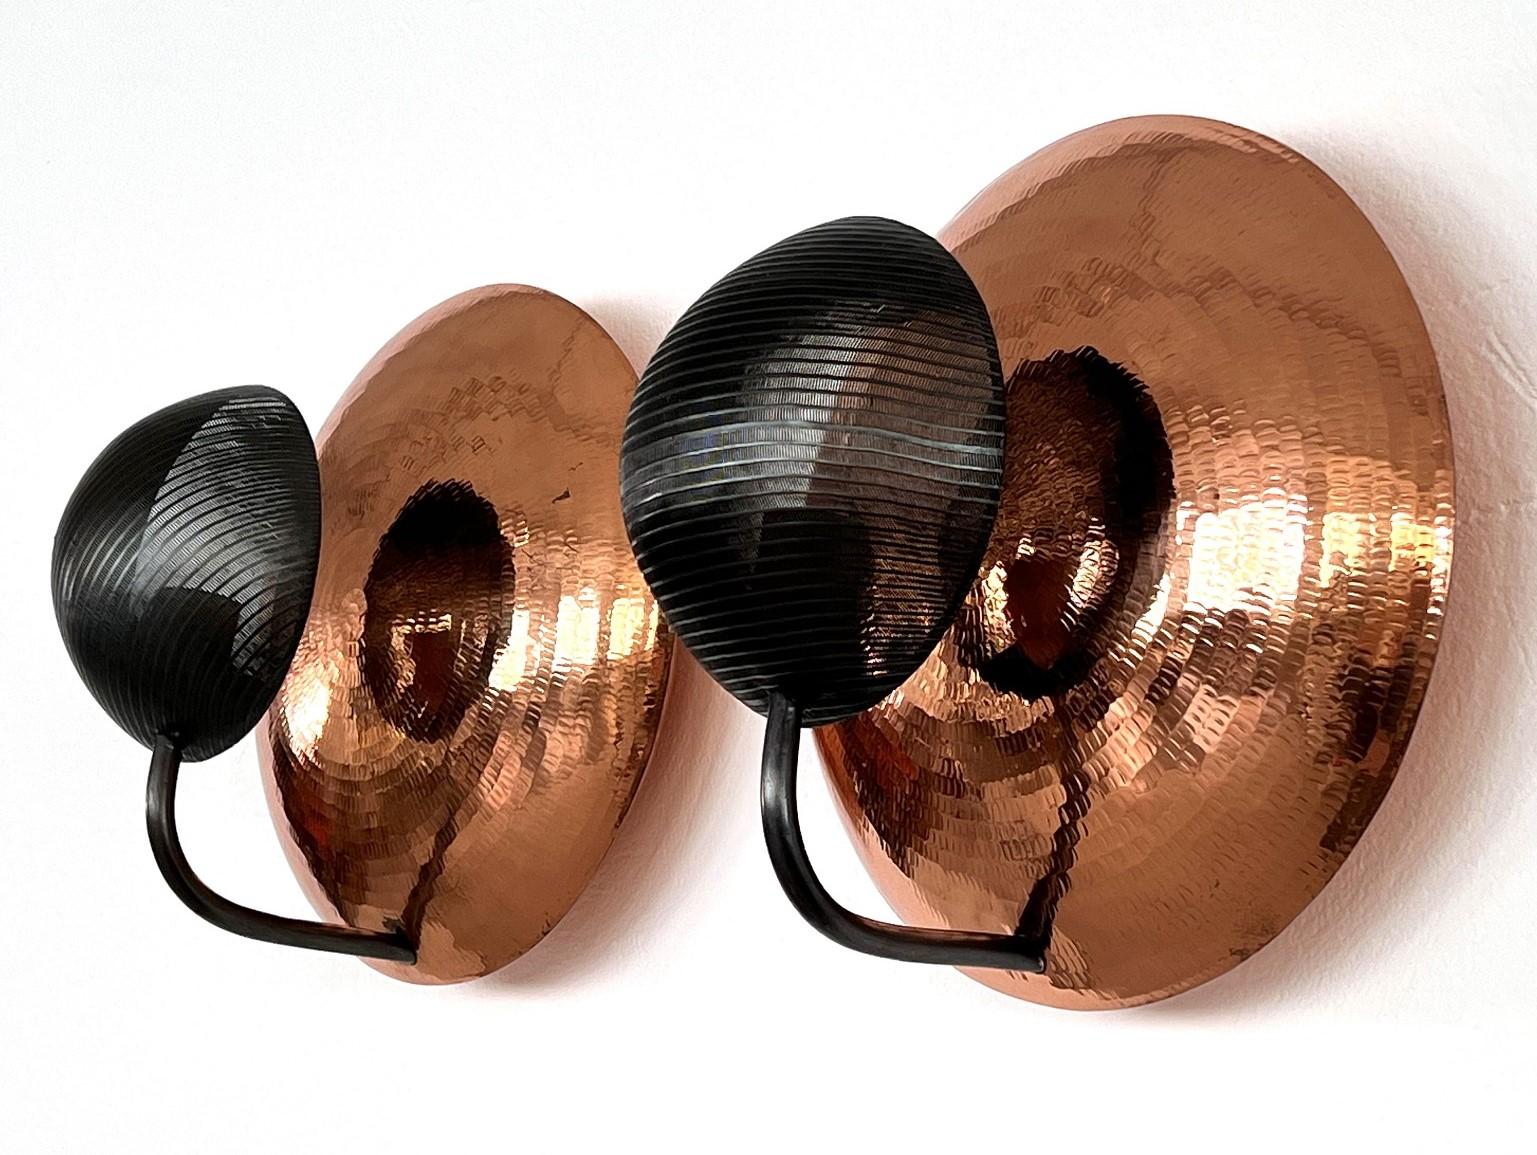 Mid-Century Modern Pair of Italian Wall Sconces in Copper and Black Perforated Metal, 1970s For Sale